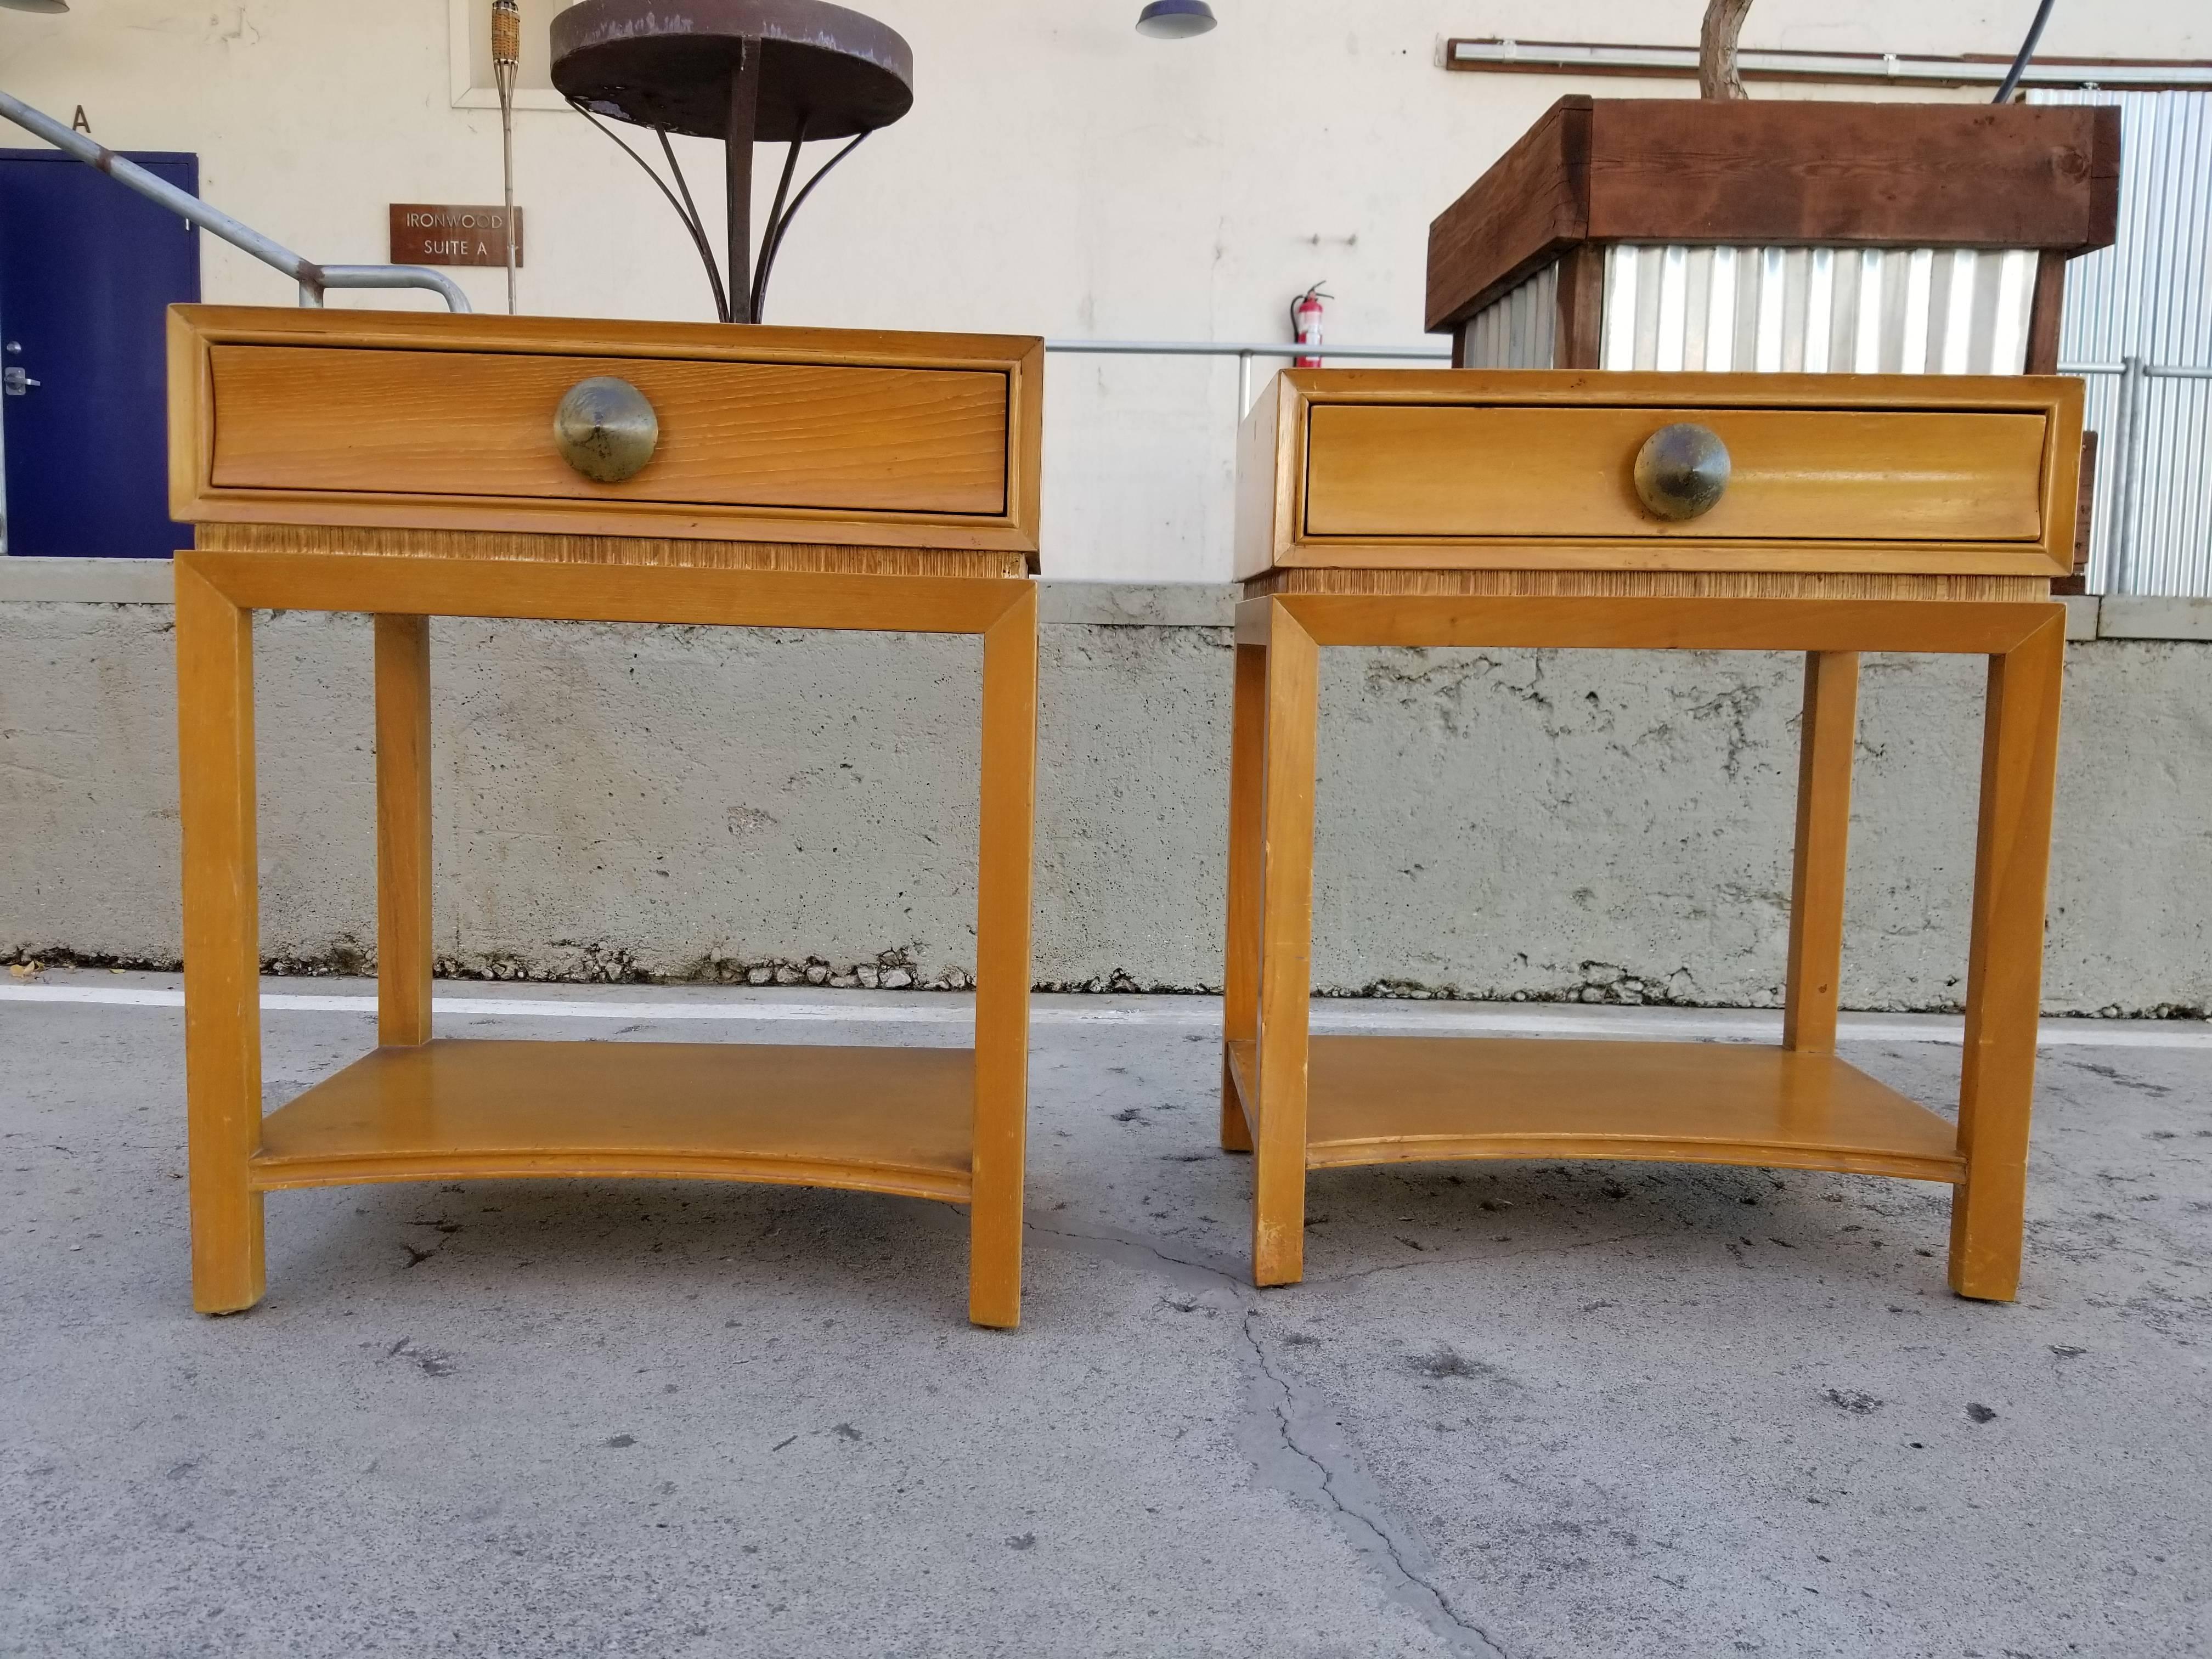 Pair of Paul Frankl end tables or night stands in original vintage condition with original hardware. Retaining Brown-Saltman label. Quality craftsmanship and materials with nice glow to golden mahogany finish and combed fir detail. Age appropriate